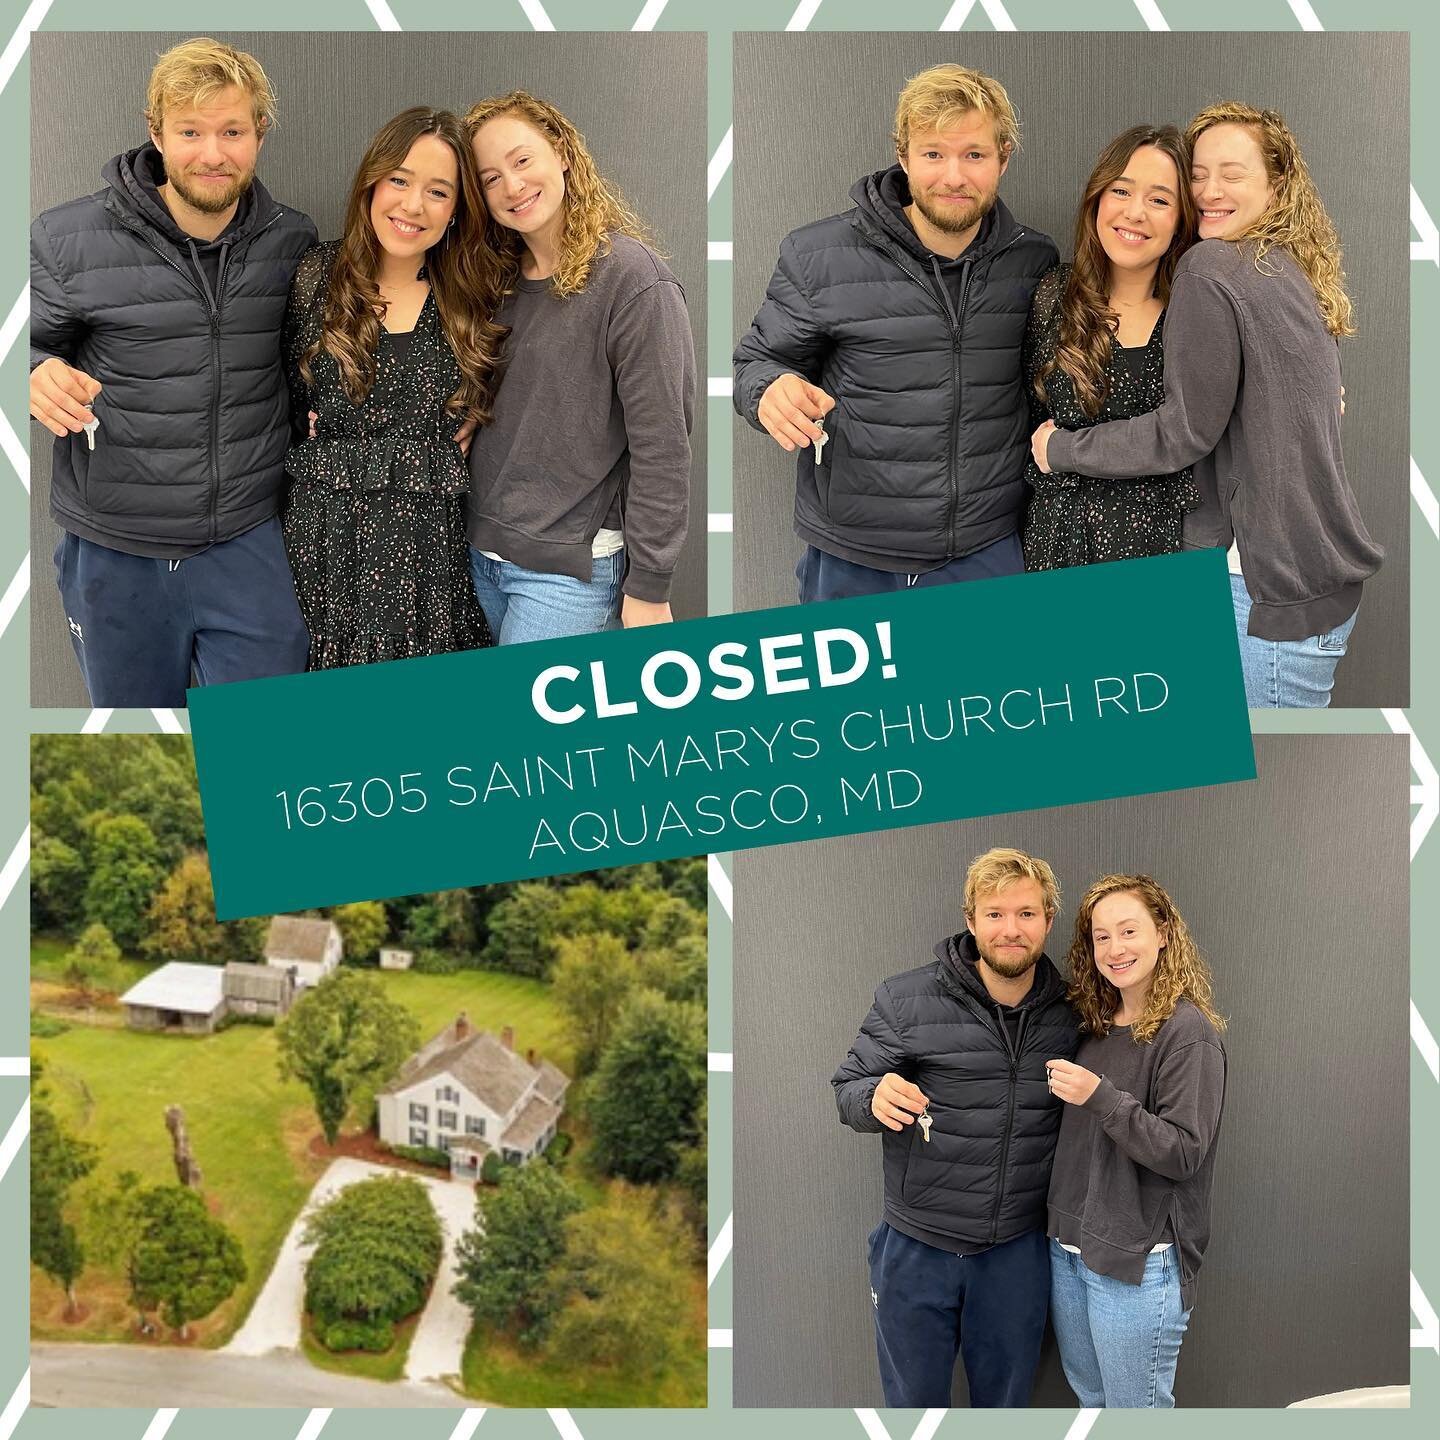 💫💚 CLOSED! Congrats to our clients on this amazing home and congrats to @ortega_somm on her first closing with J2!!!
.
.
.
#j2realestate #dreamhomesunlocked #makinghomeshome  #historicalhomes #lifetimebroker#mdrealestate #aquascomd #dcrealestate #h